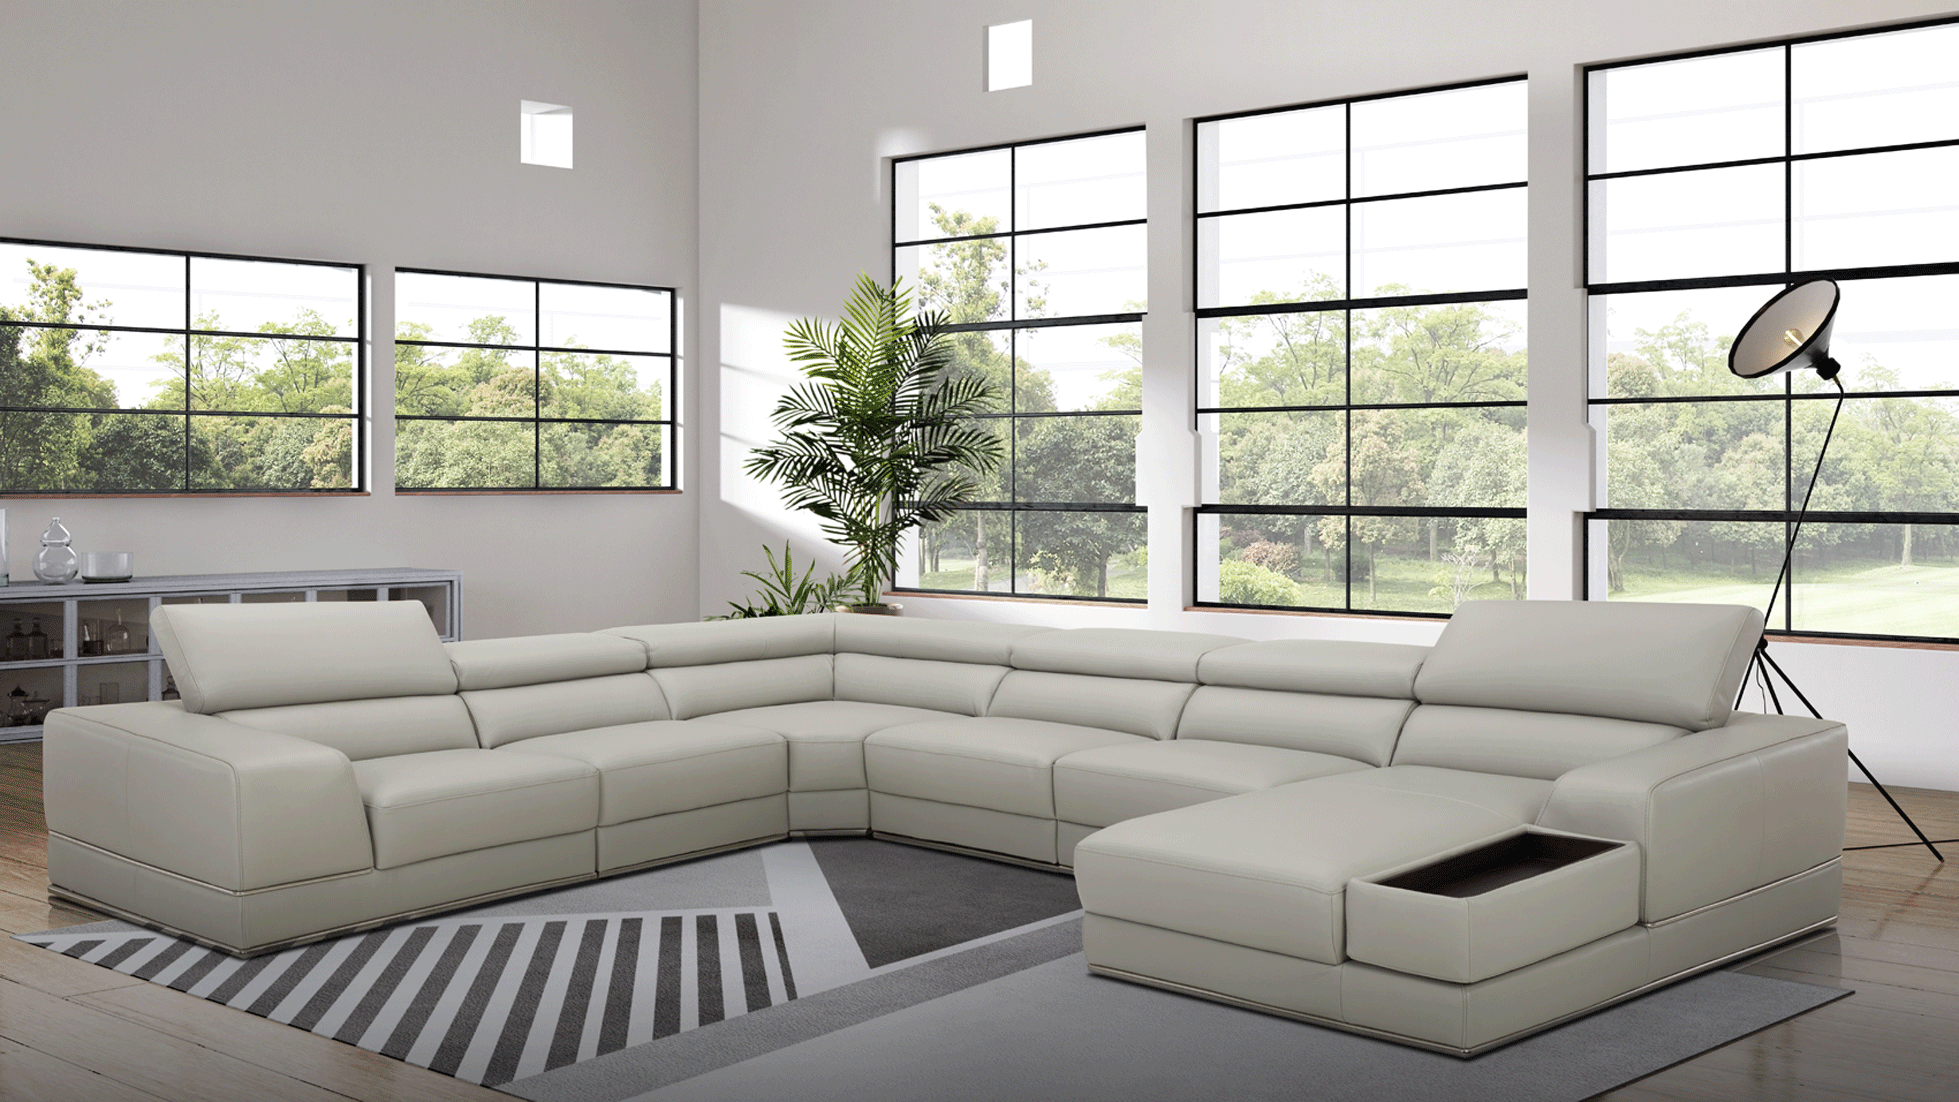 Living Room Furniture Reclining and Sliding Seats Sets 1576 Sectional Right by Kuka